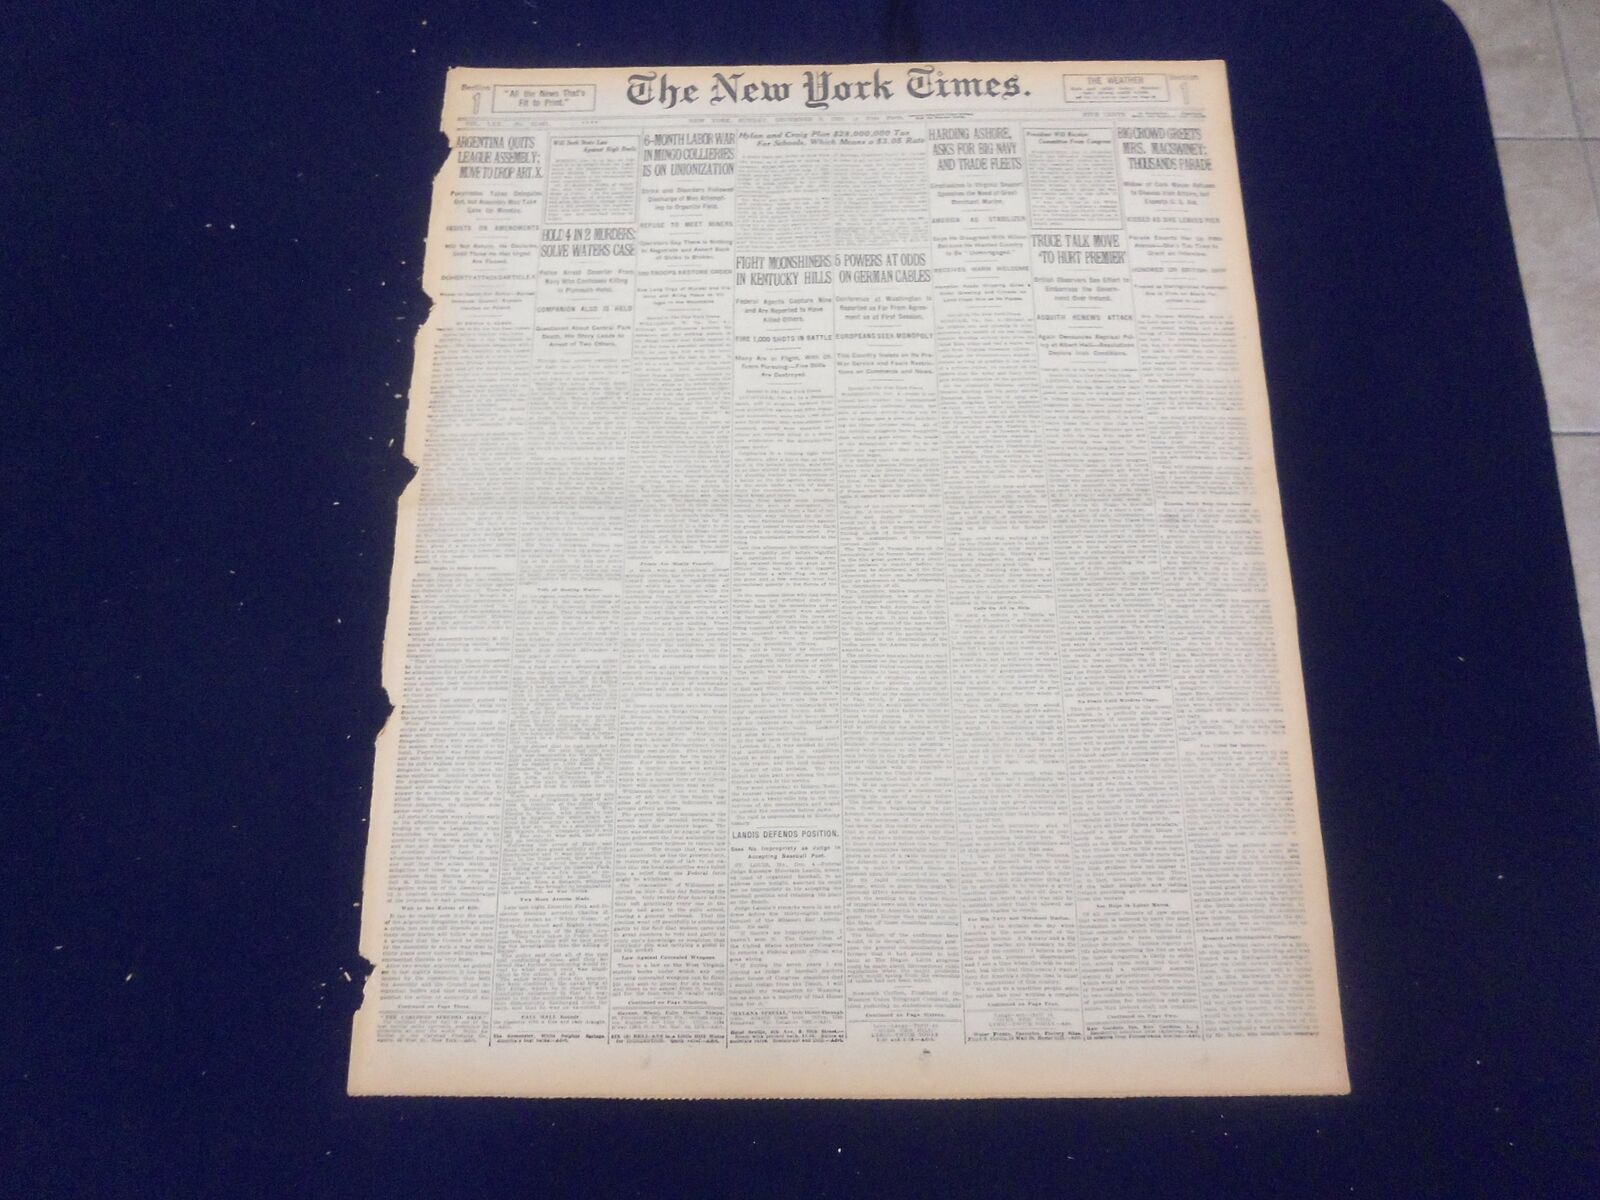 1920 DECEMBER 5 NEW YORK TIMES - FIGHT MOONSHINERS IN KENTUCKY HILLS - NT 8475